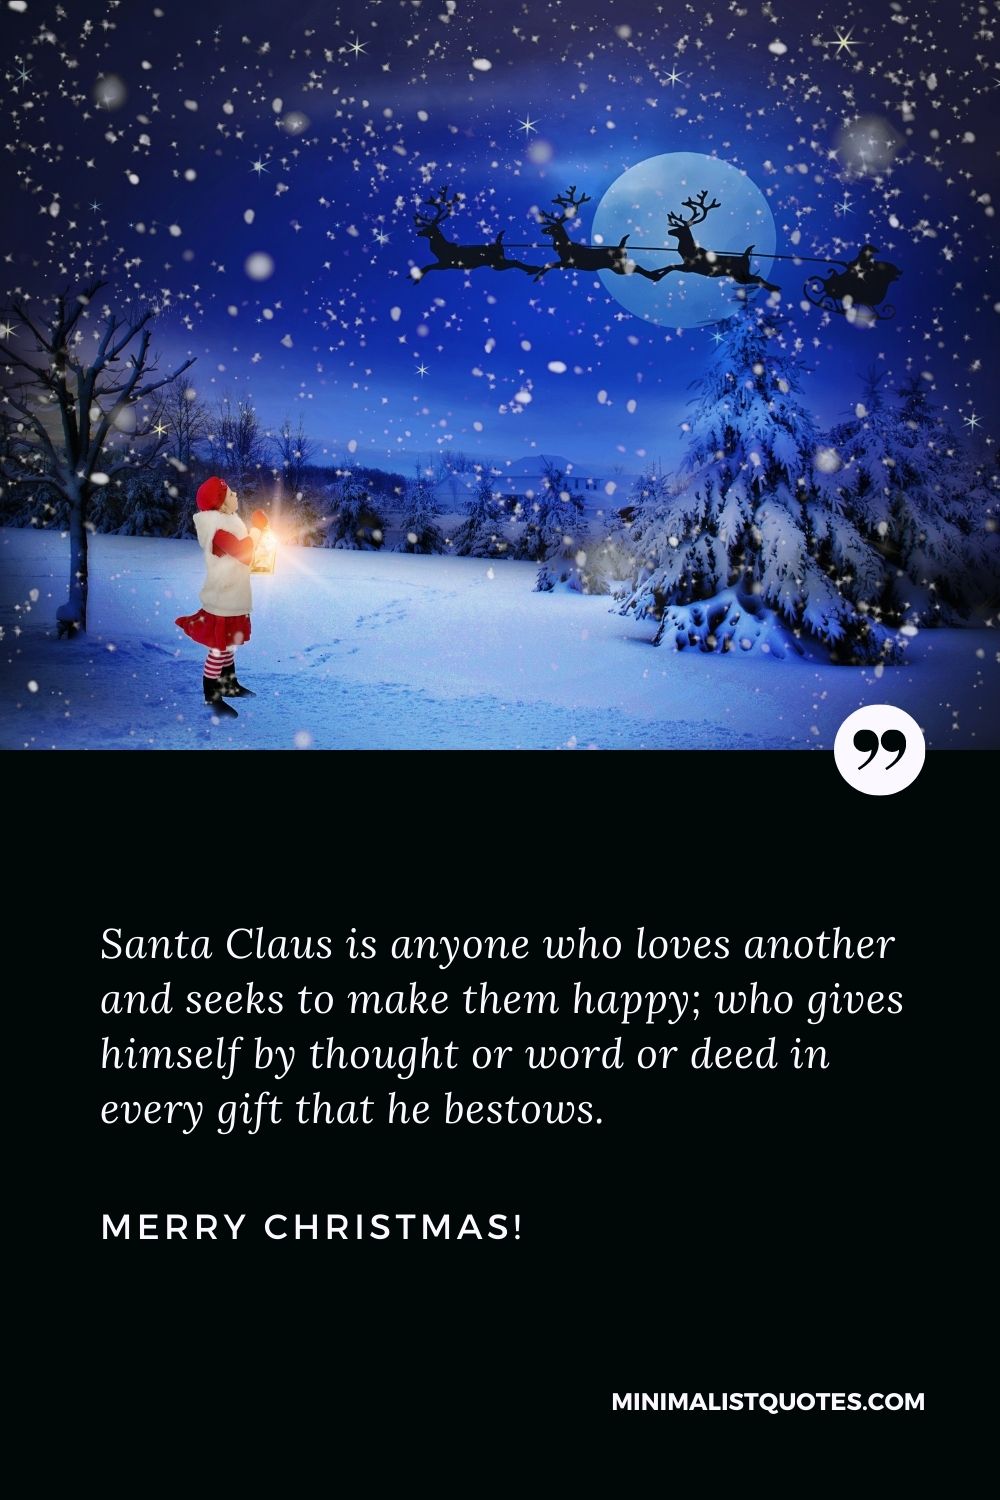 Santa quotes: Santa Claus is anyone who loves another and seeks to make them happy; who gives himself by thought or word or deed in every gift that he bestows. Merry Christmas!